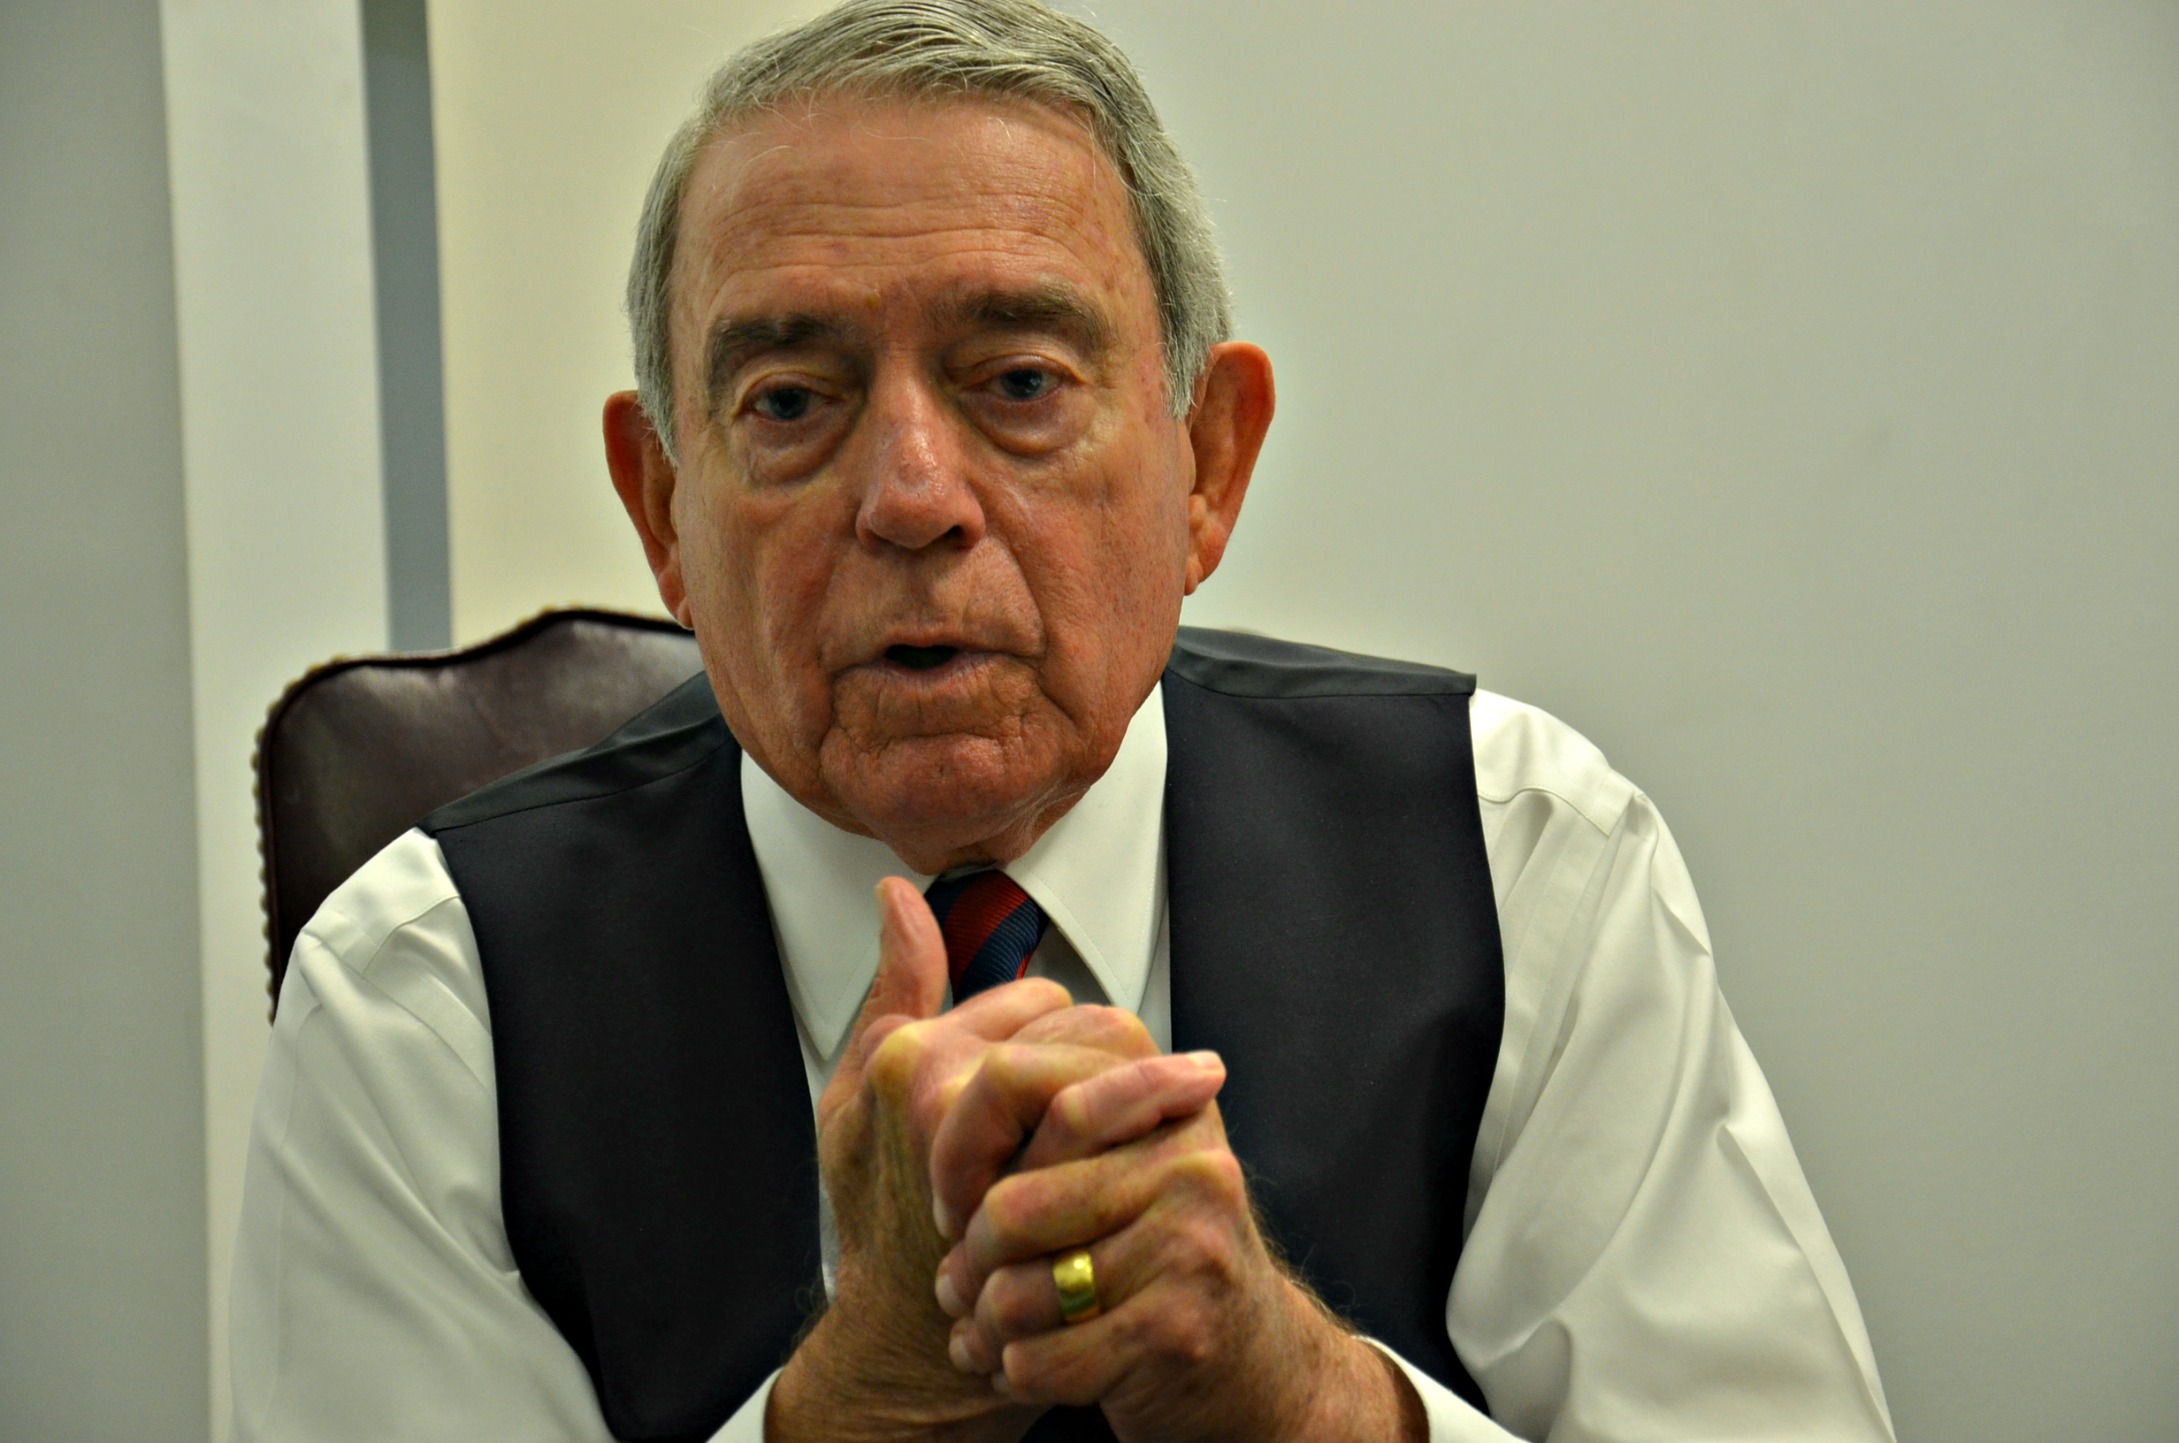 Dan Rather to +972: U.S. reporting on conflict is Israel-centric